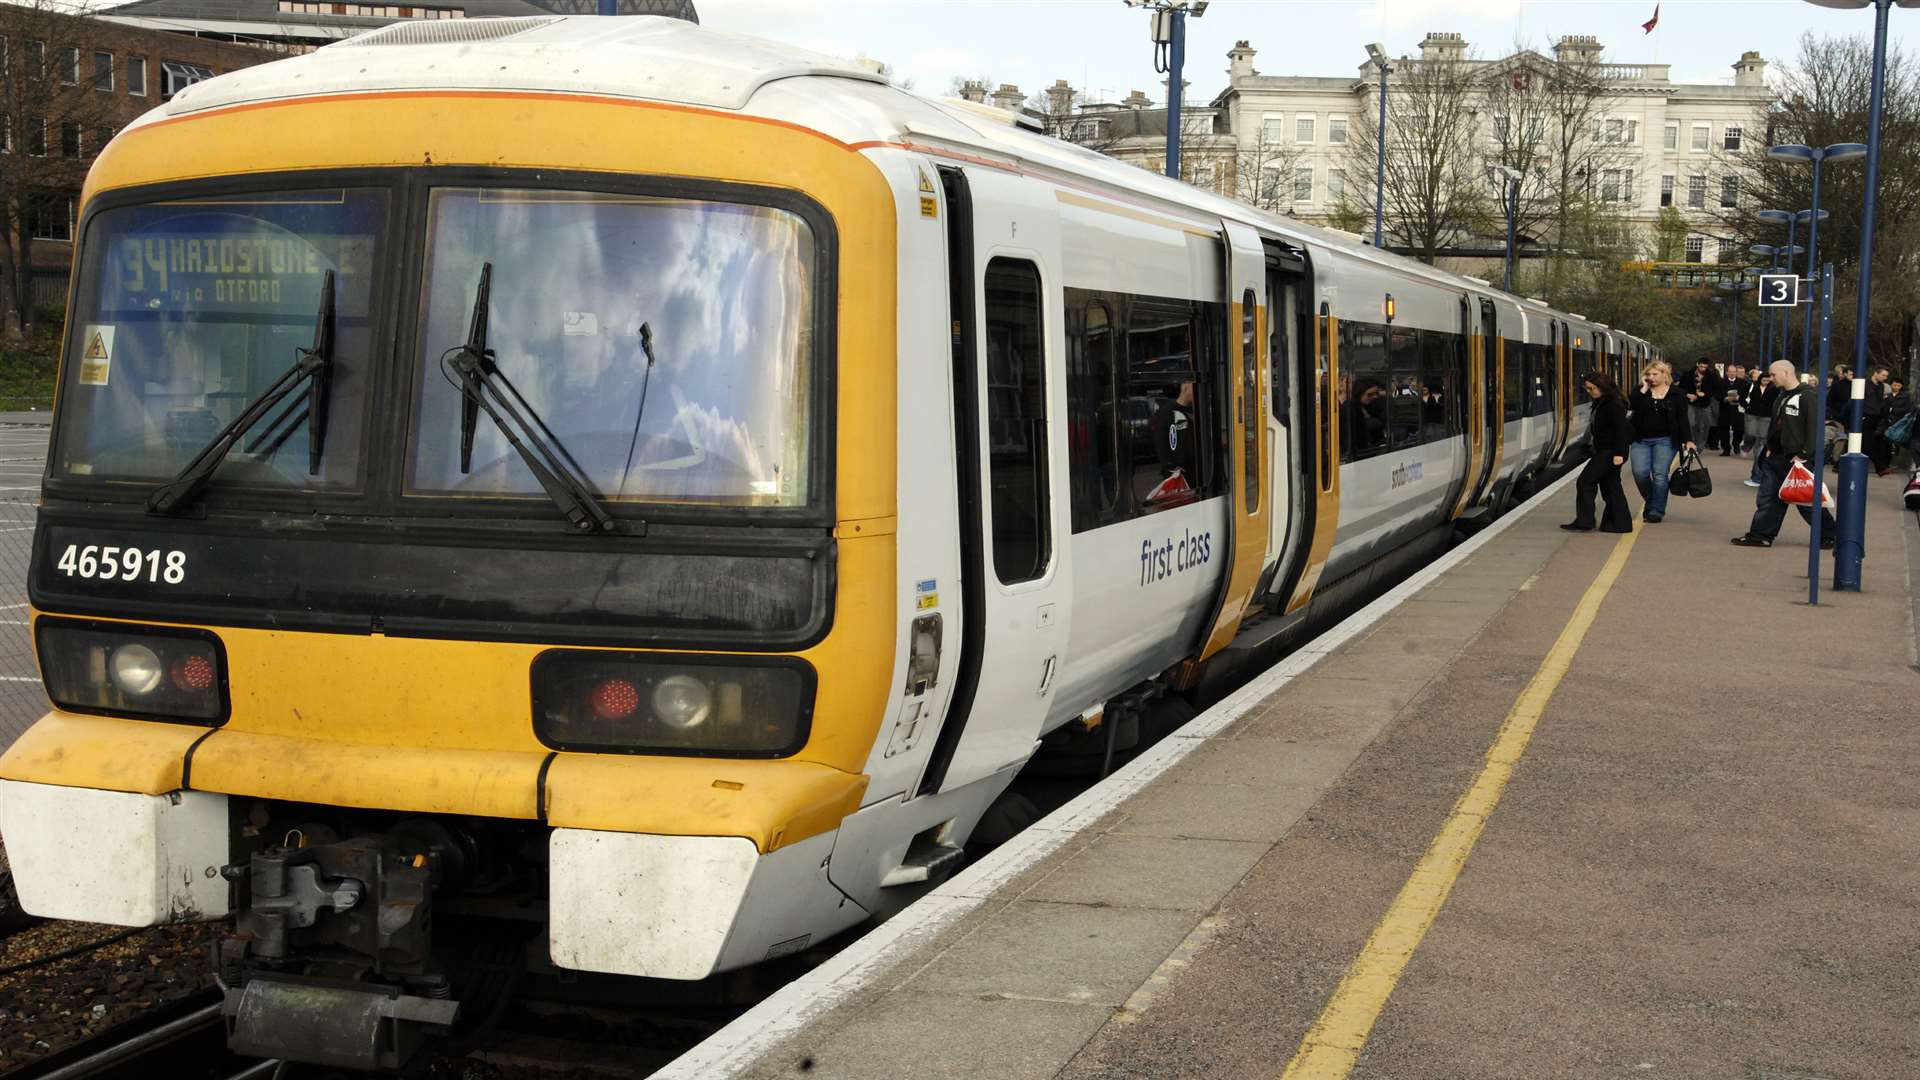 Trains are disrupted due to weather